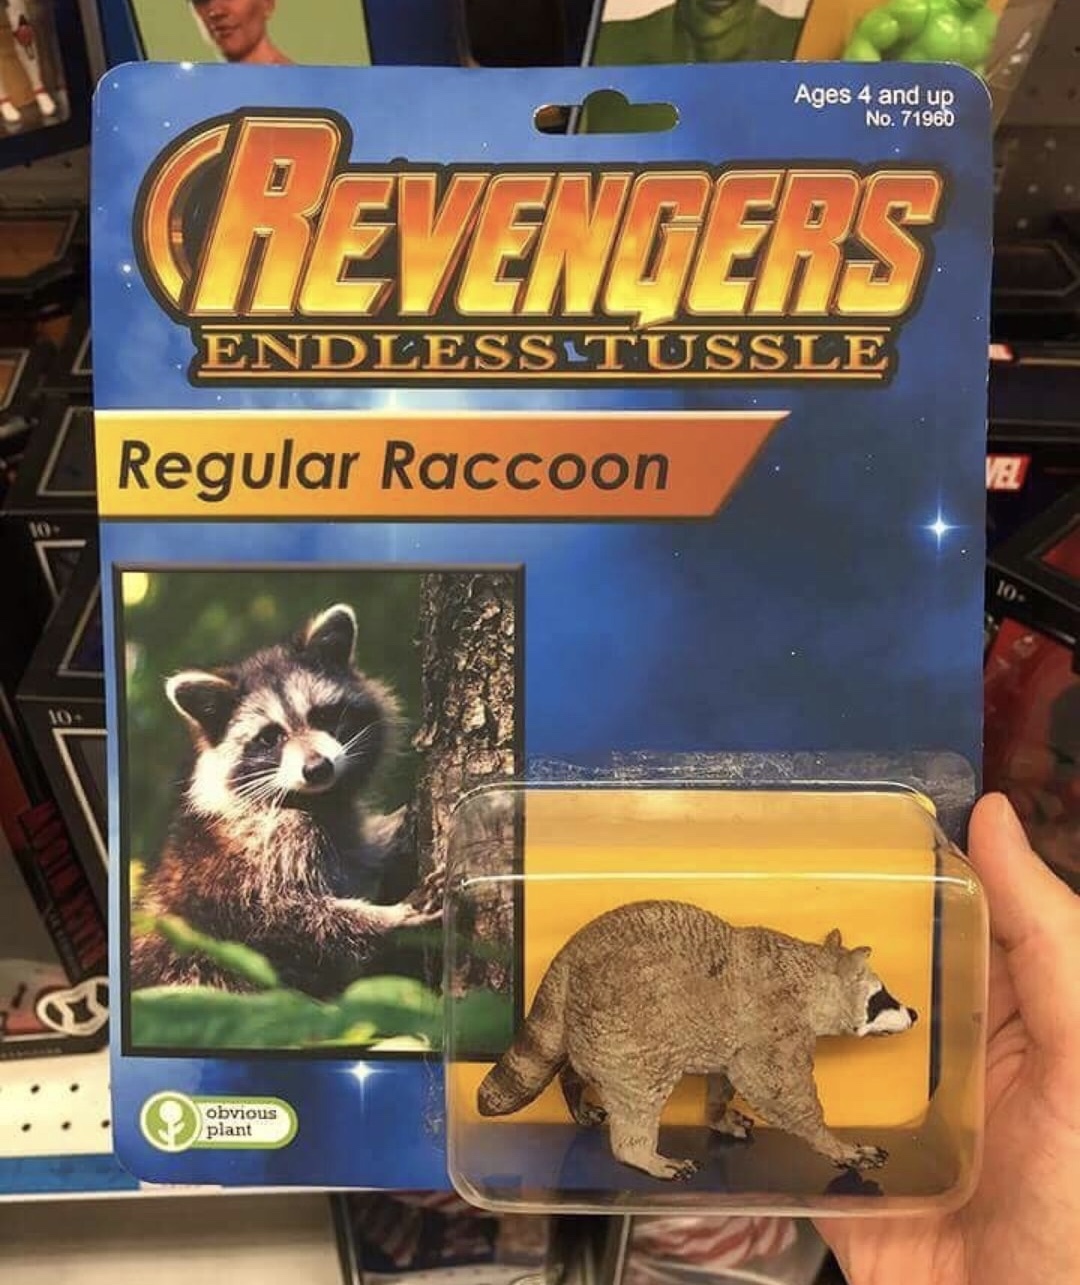 memes - revengers action figures - Ages 4 and up No. 71960 Gevengers Endless Tussle Regular Raccoon obvious plant